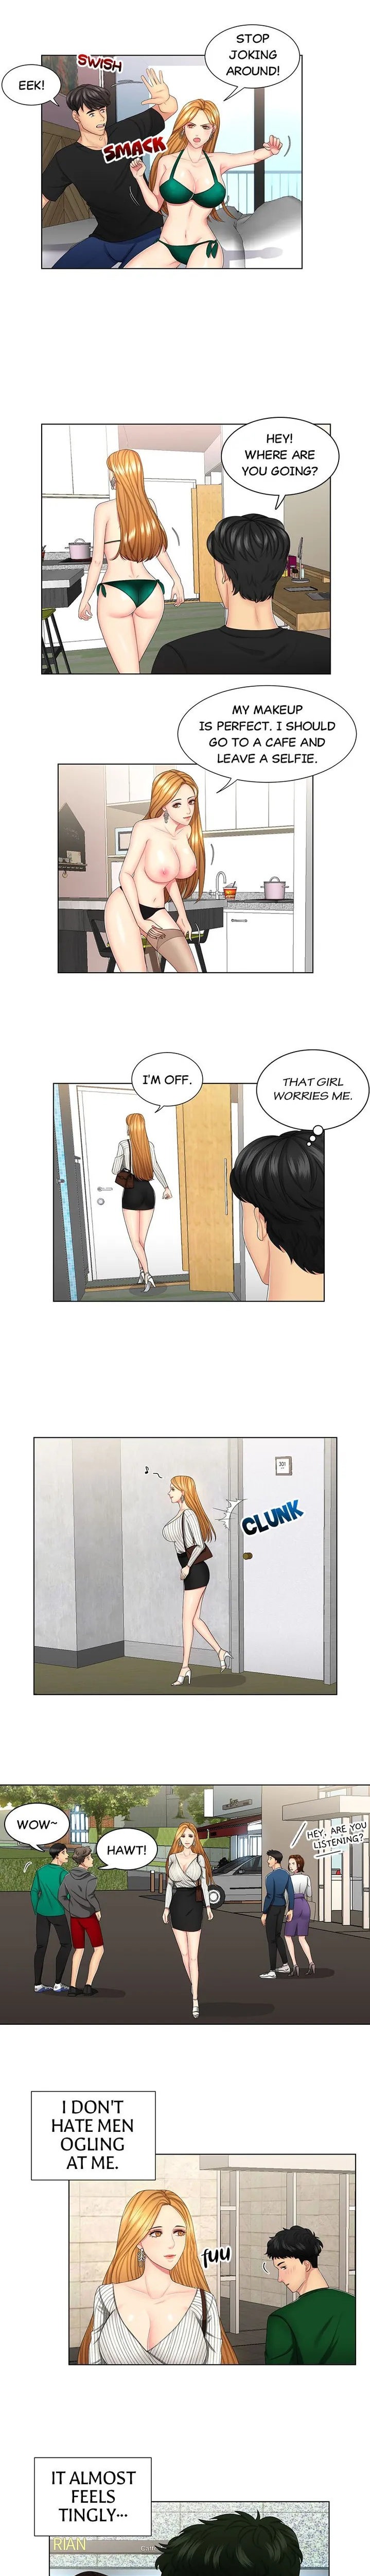 Sneaky Deal - Chapter 1 Page 4